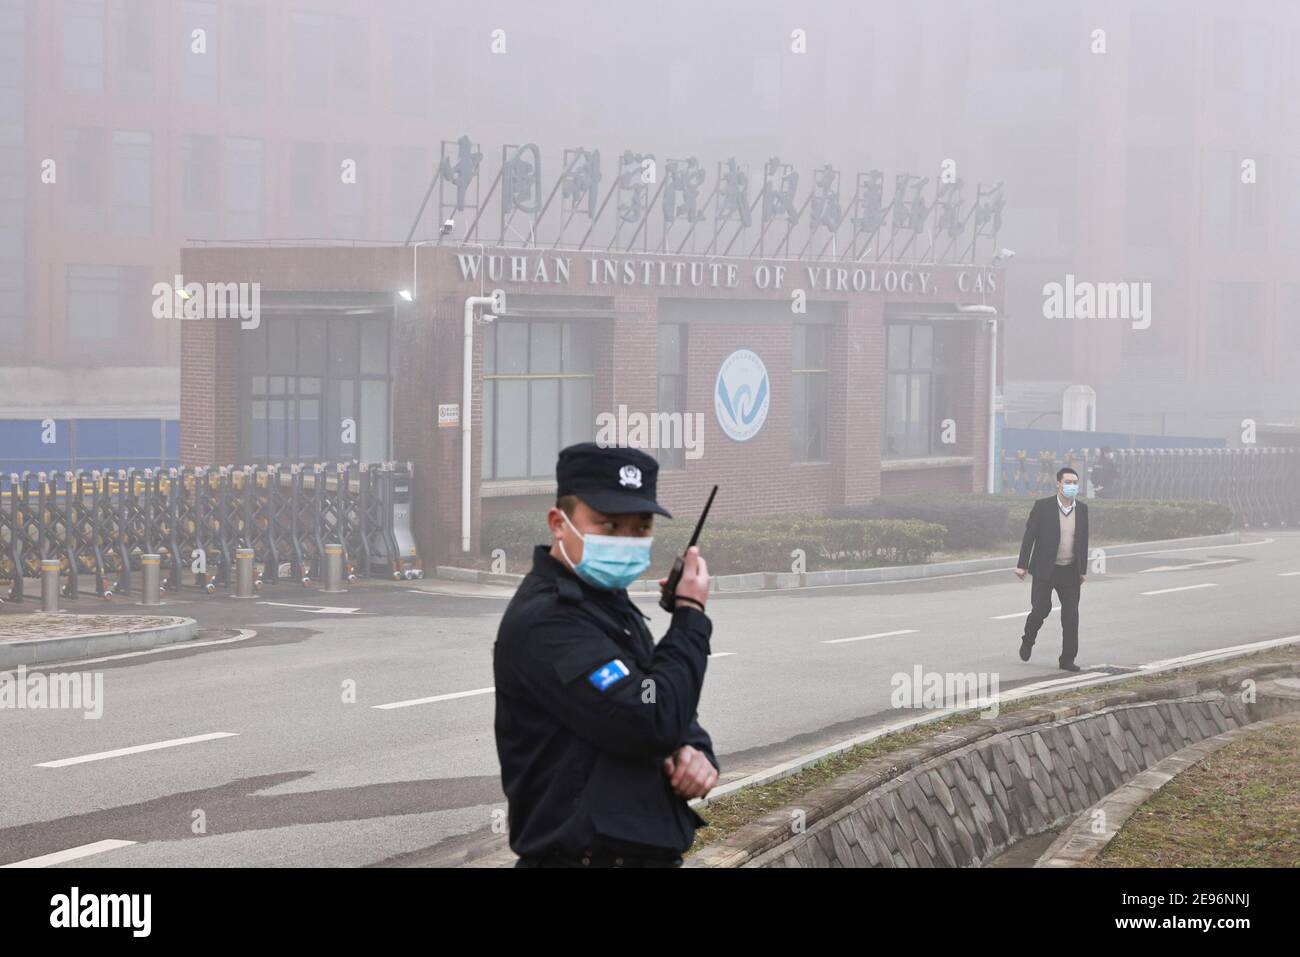 Security personnel stand outside Wuhan Institute of Virology as members of the World Health Organization (WHO) team tasked with investigating the origins of the coronavirus disease (COVID-19) arrive for a visit, in Wuhan, Hubei province, China February 3, 2021. REUTERS/Thomas Peter Stock Photo